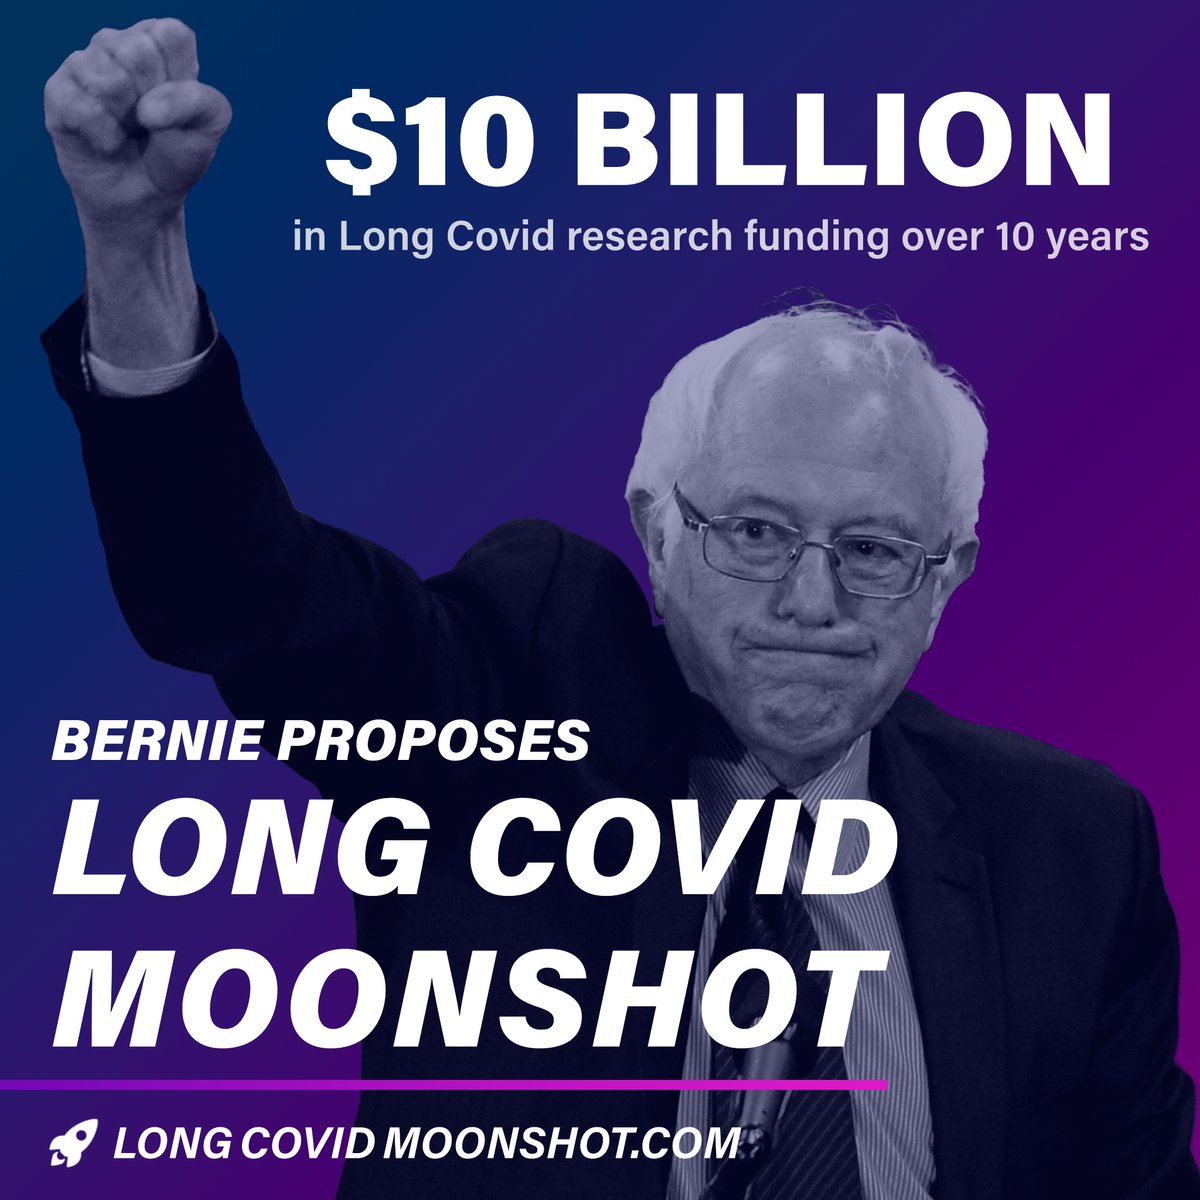 BREAKING: Senator Bernie Sanders drafts proposal for Long Covid Moonshot. The proposal earmarks $10B in Long Covid research funding over the next decade.